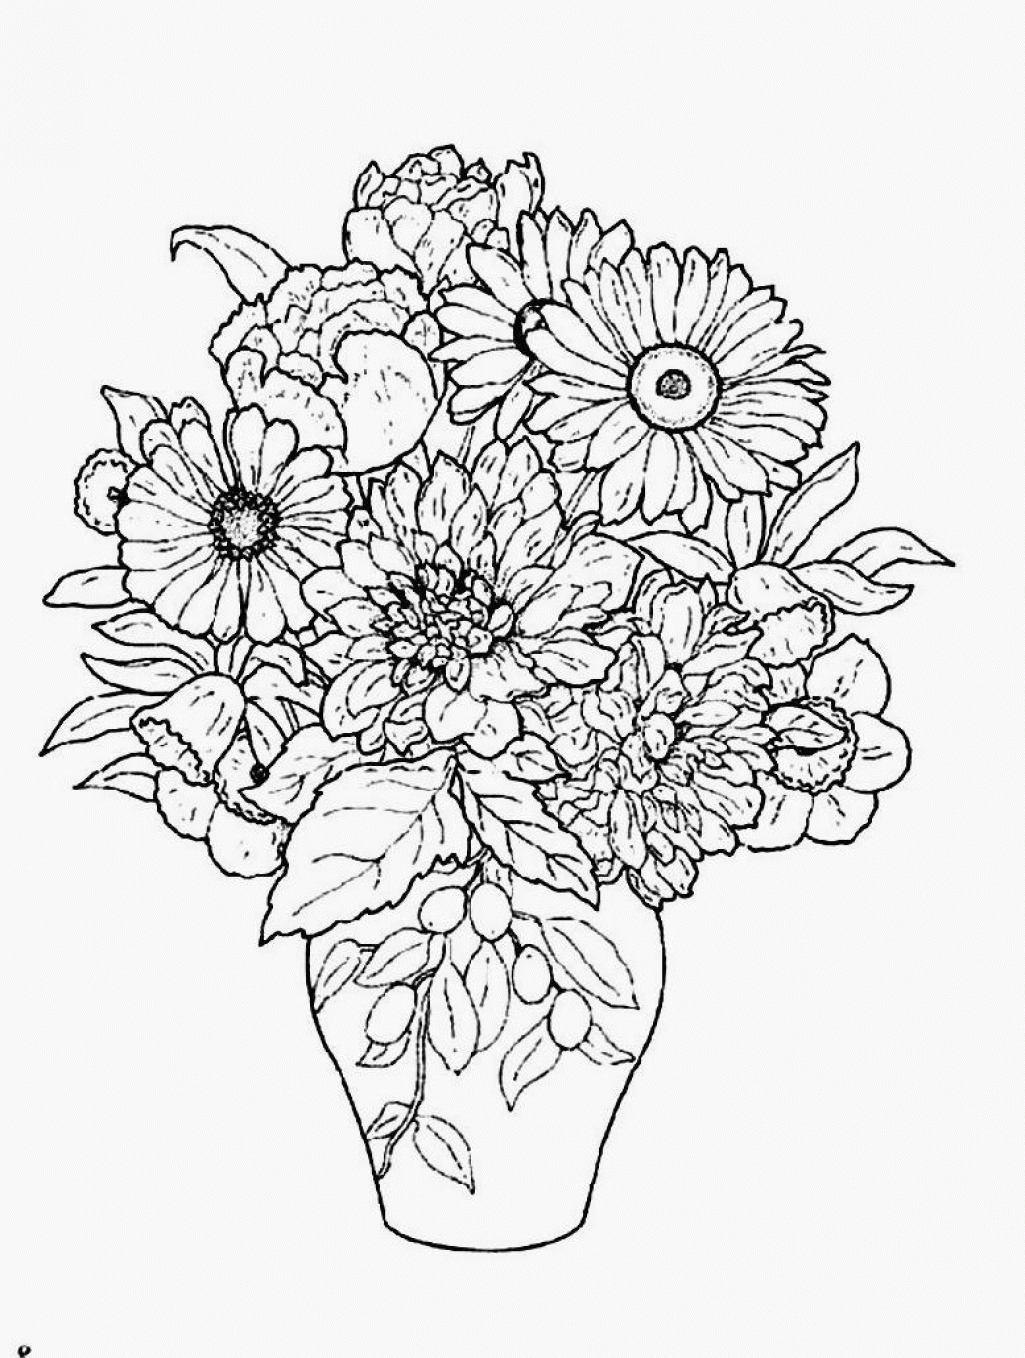 Coloring Pages Of Flowers In A Vase - Coloring